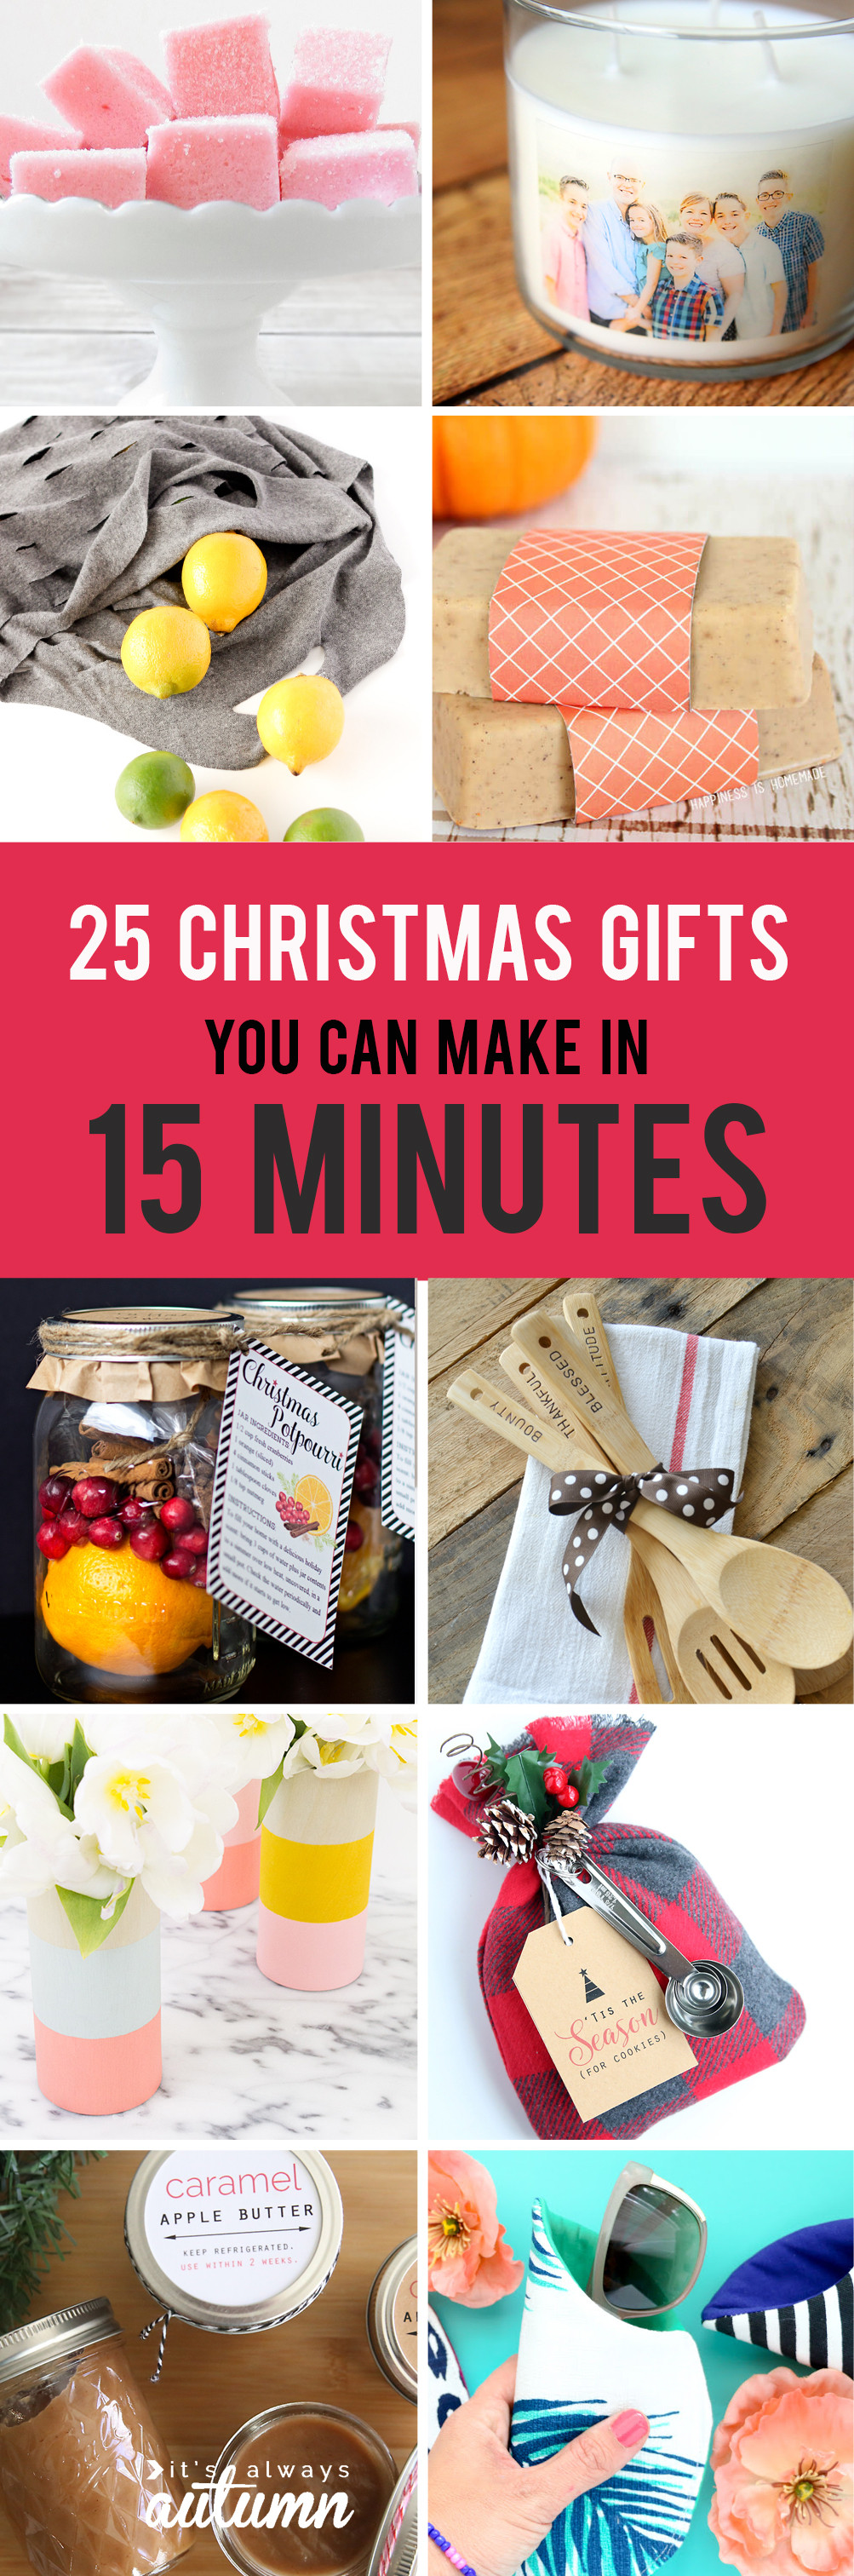 Best DIY Christmas Gifts
 25 easy homemade Christmas ts you can make in 15